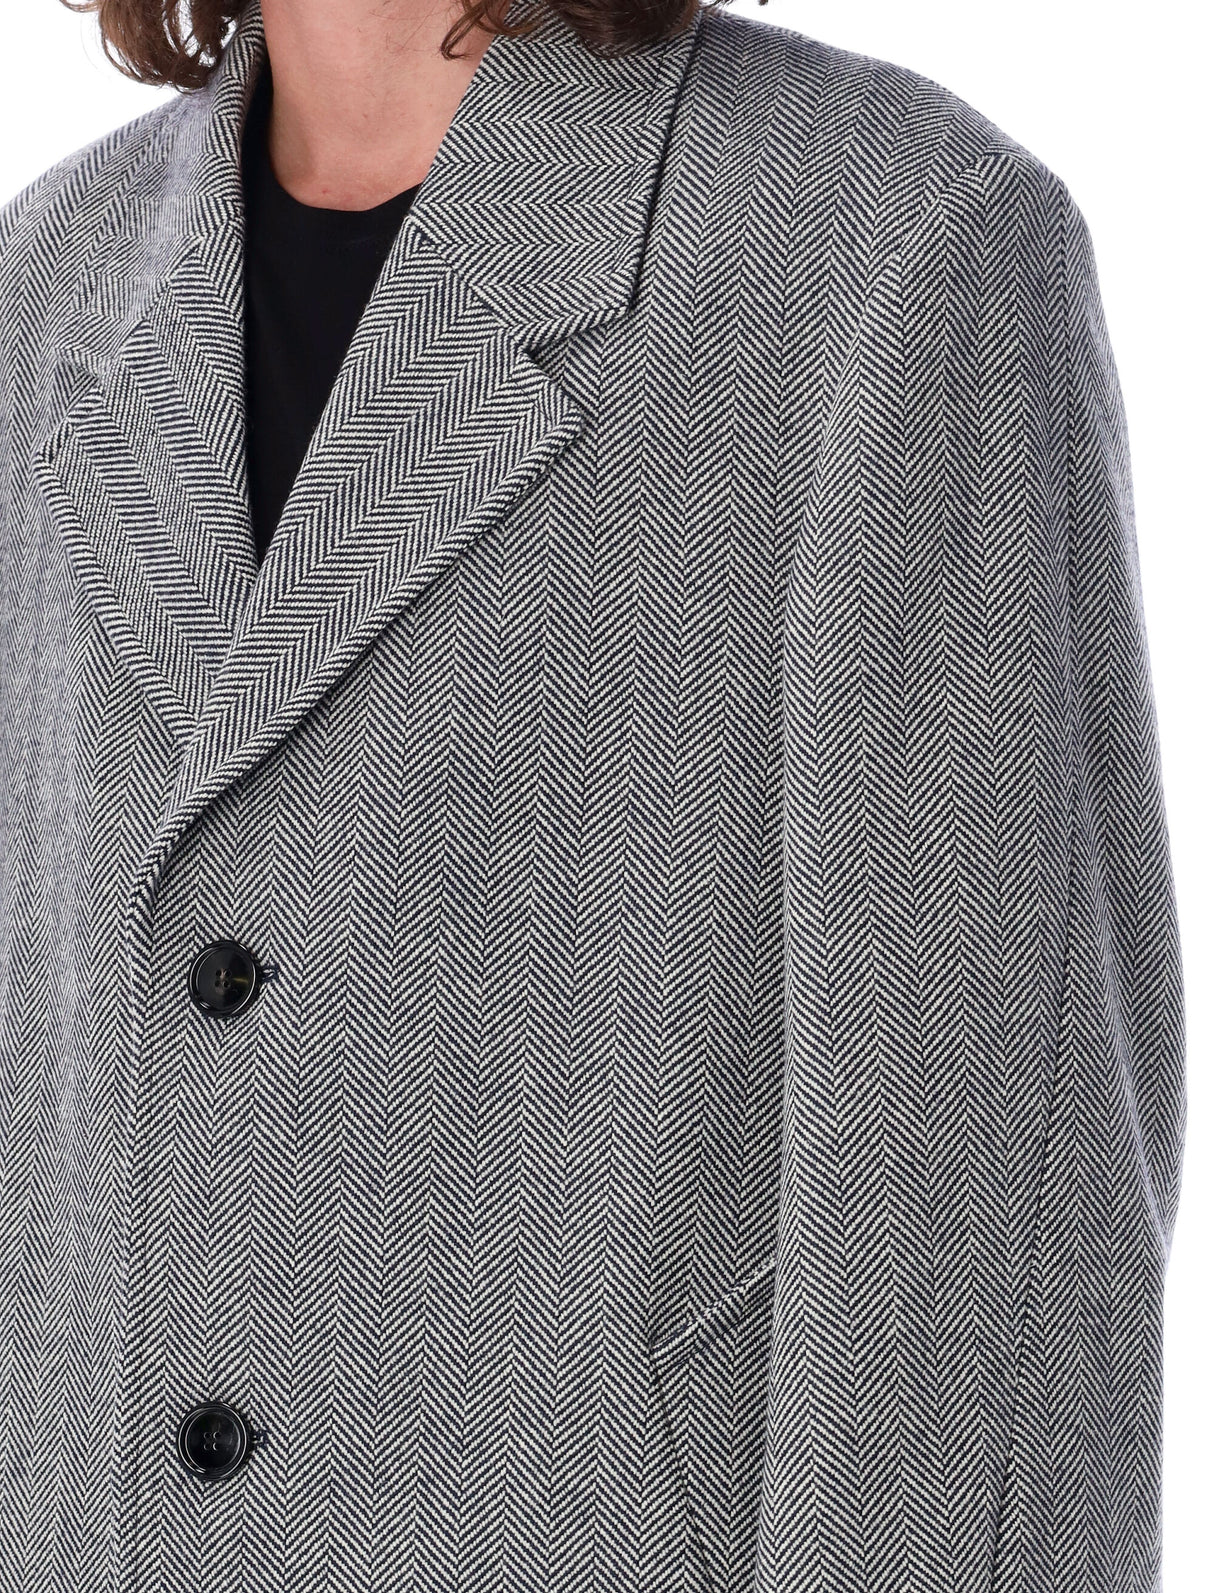 Herringbone Jacket with V-Neck and Single Breast for Men